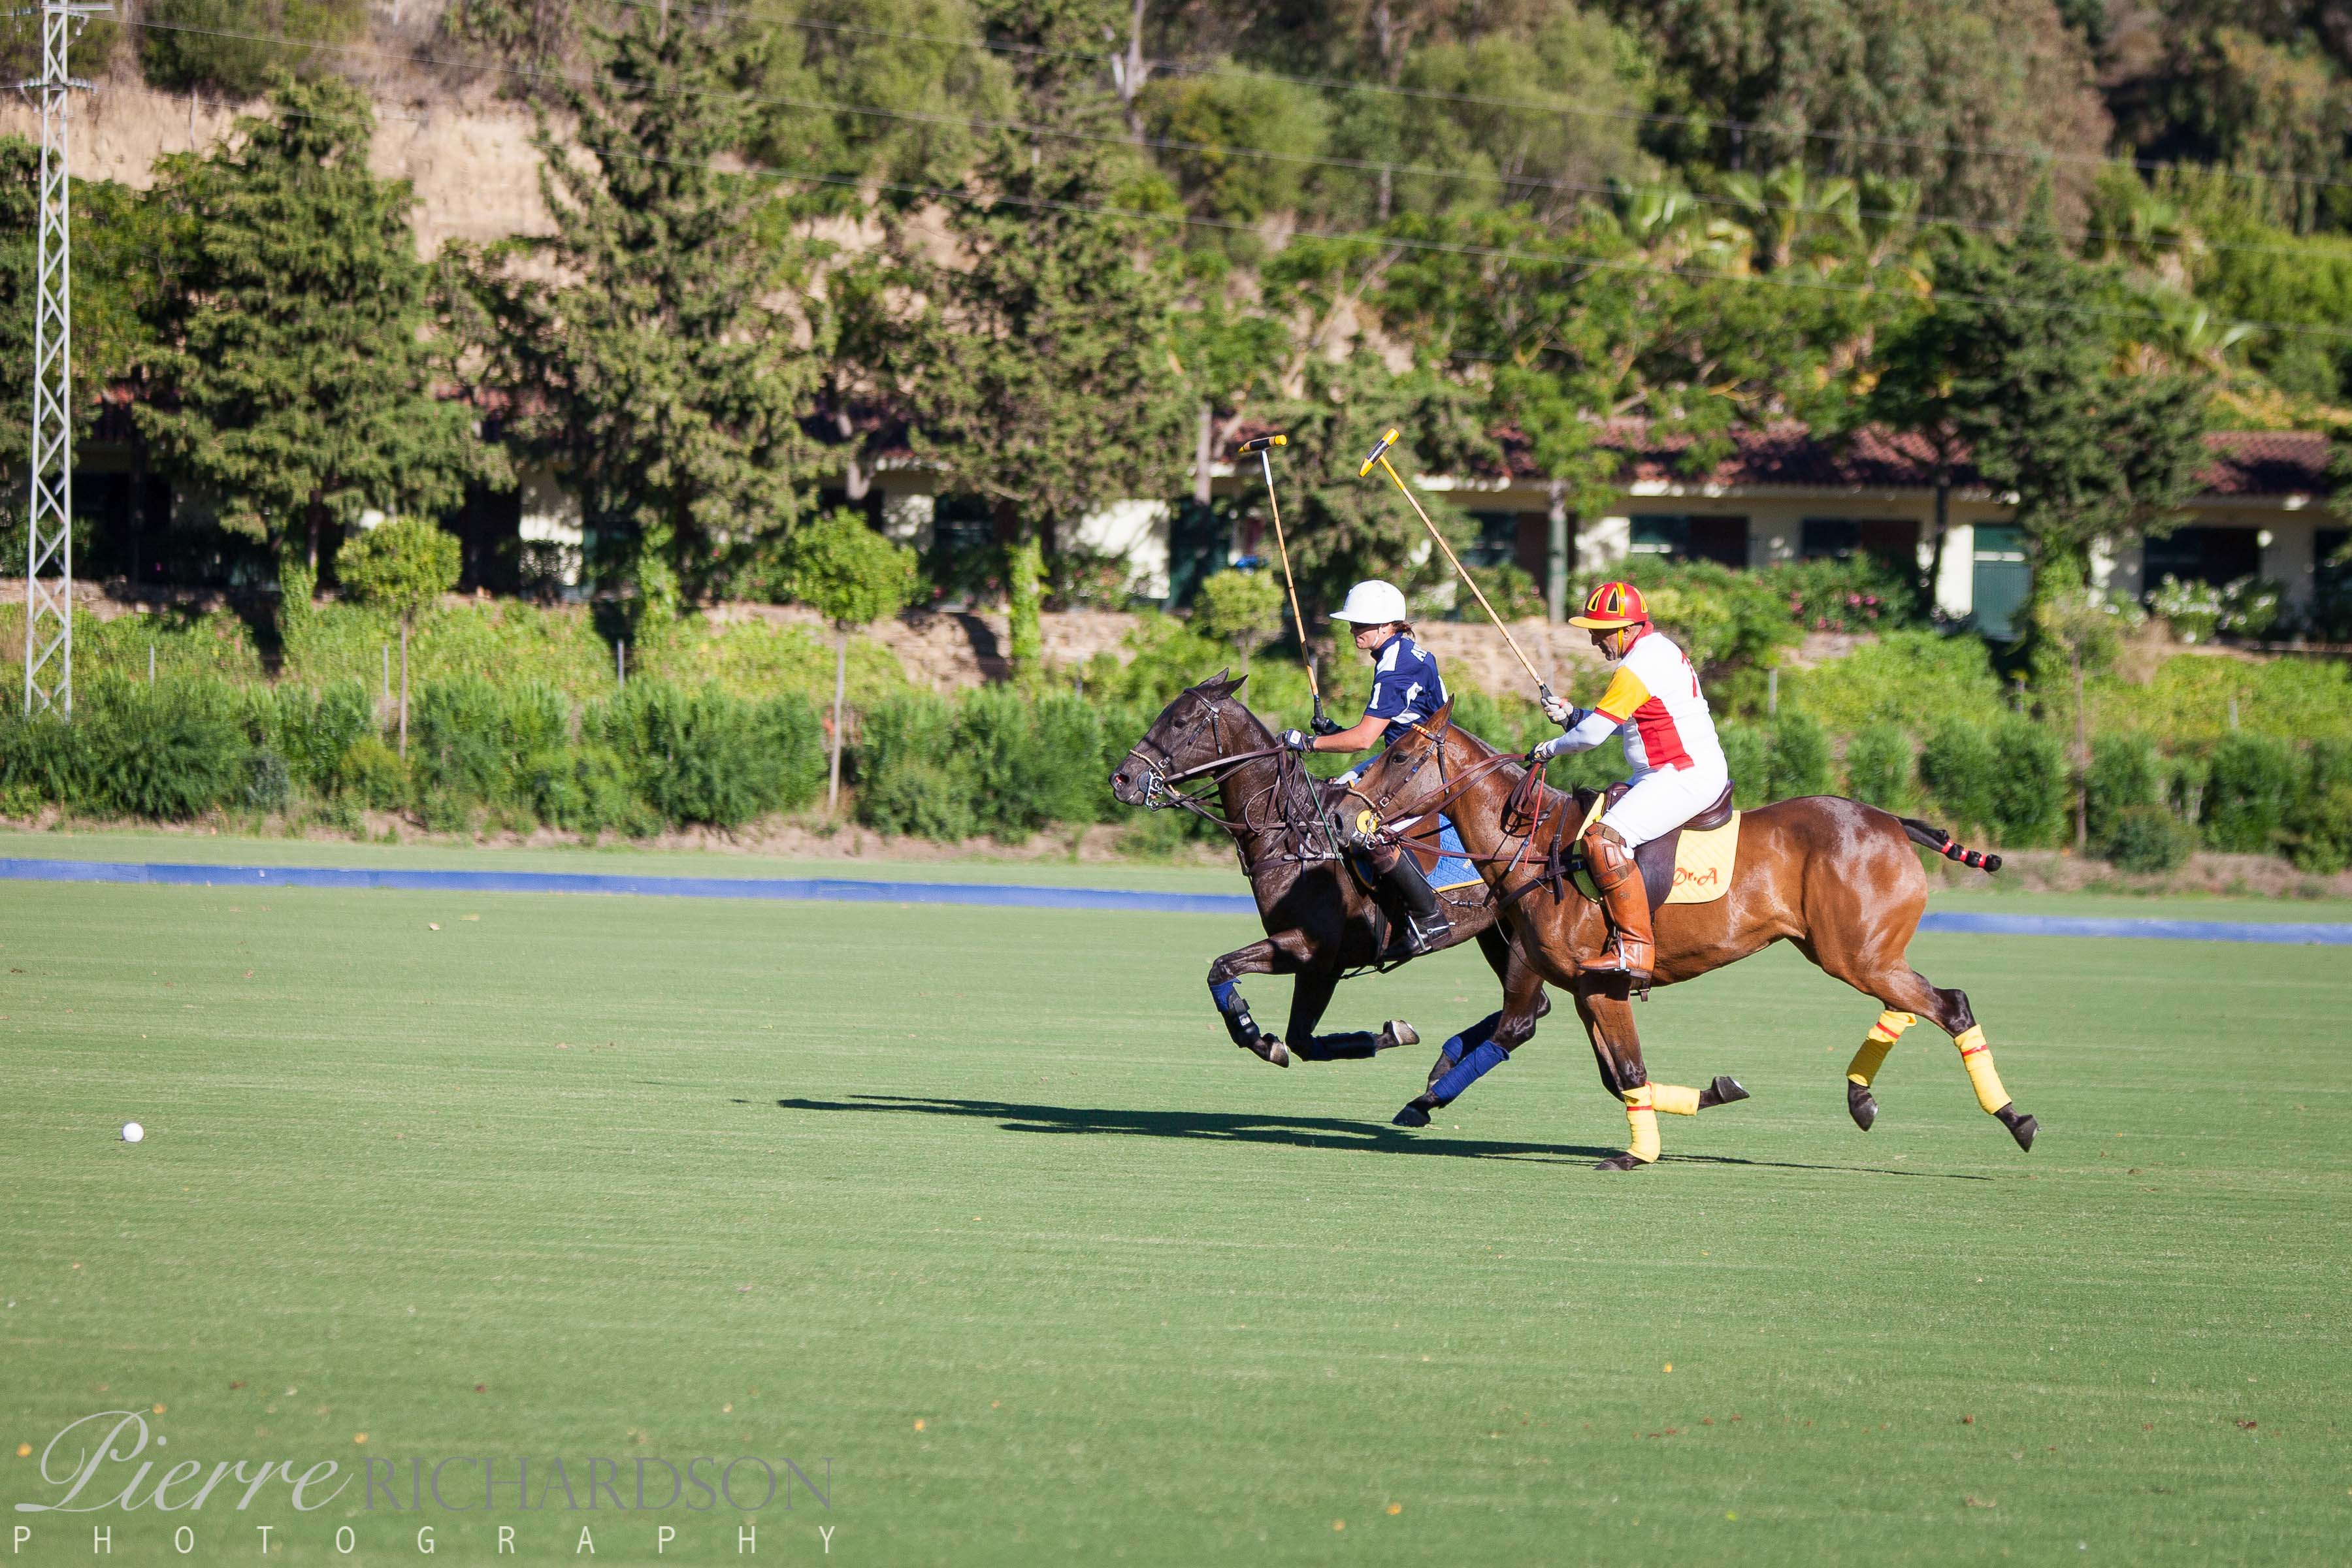 Competitive Polo in Seville - POLO+10